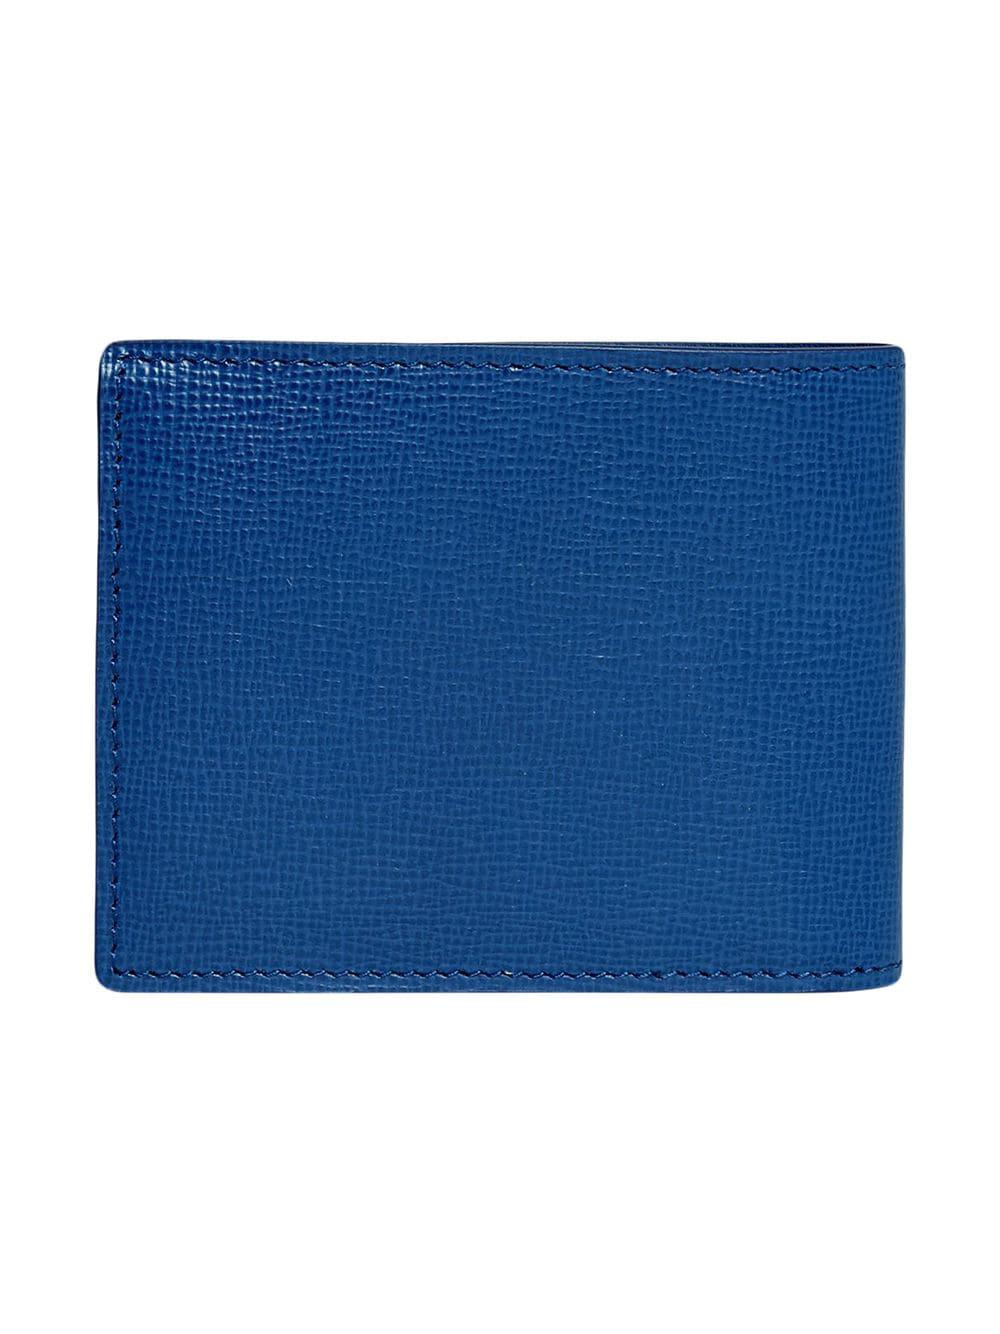 Burberry Grainy Leather And House Check Bifold Wallet Storm Blue for Men